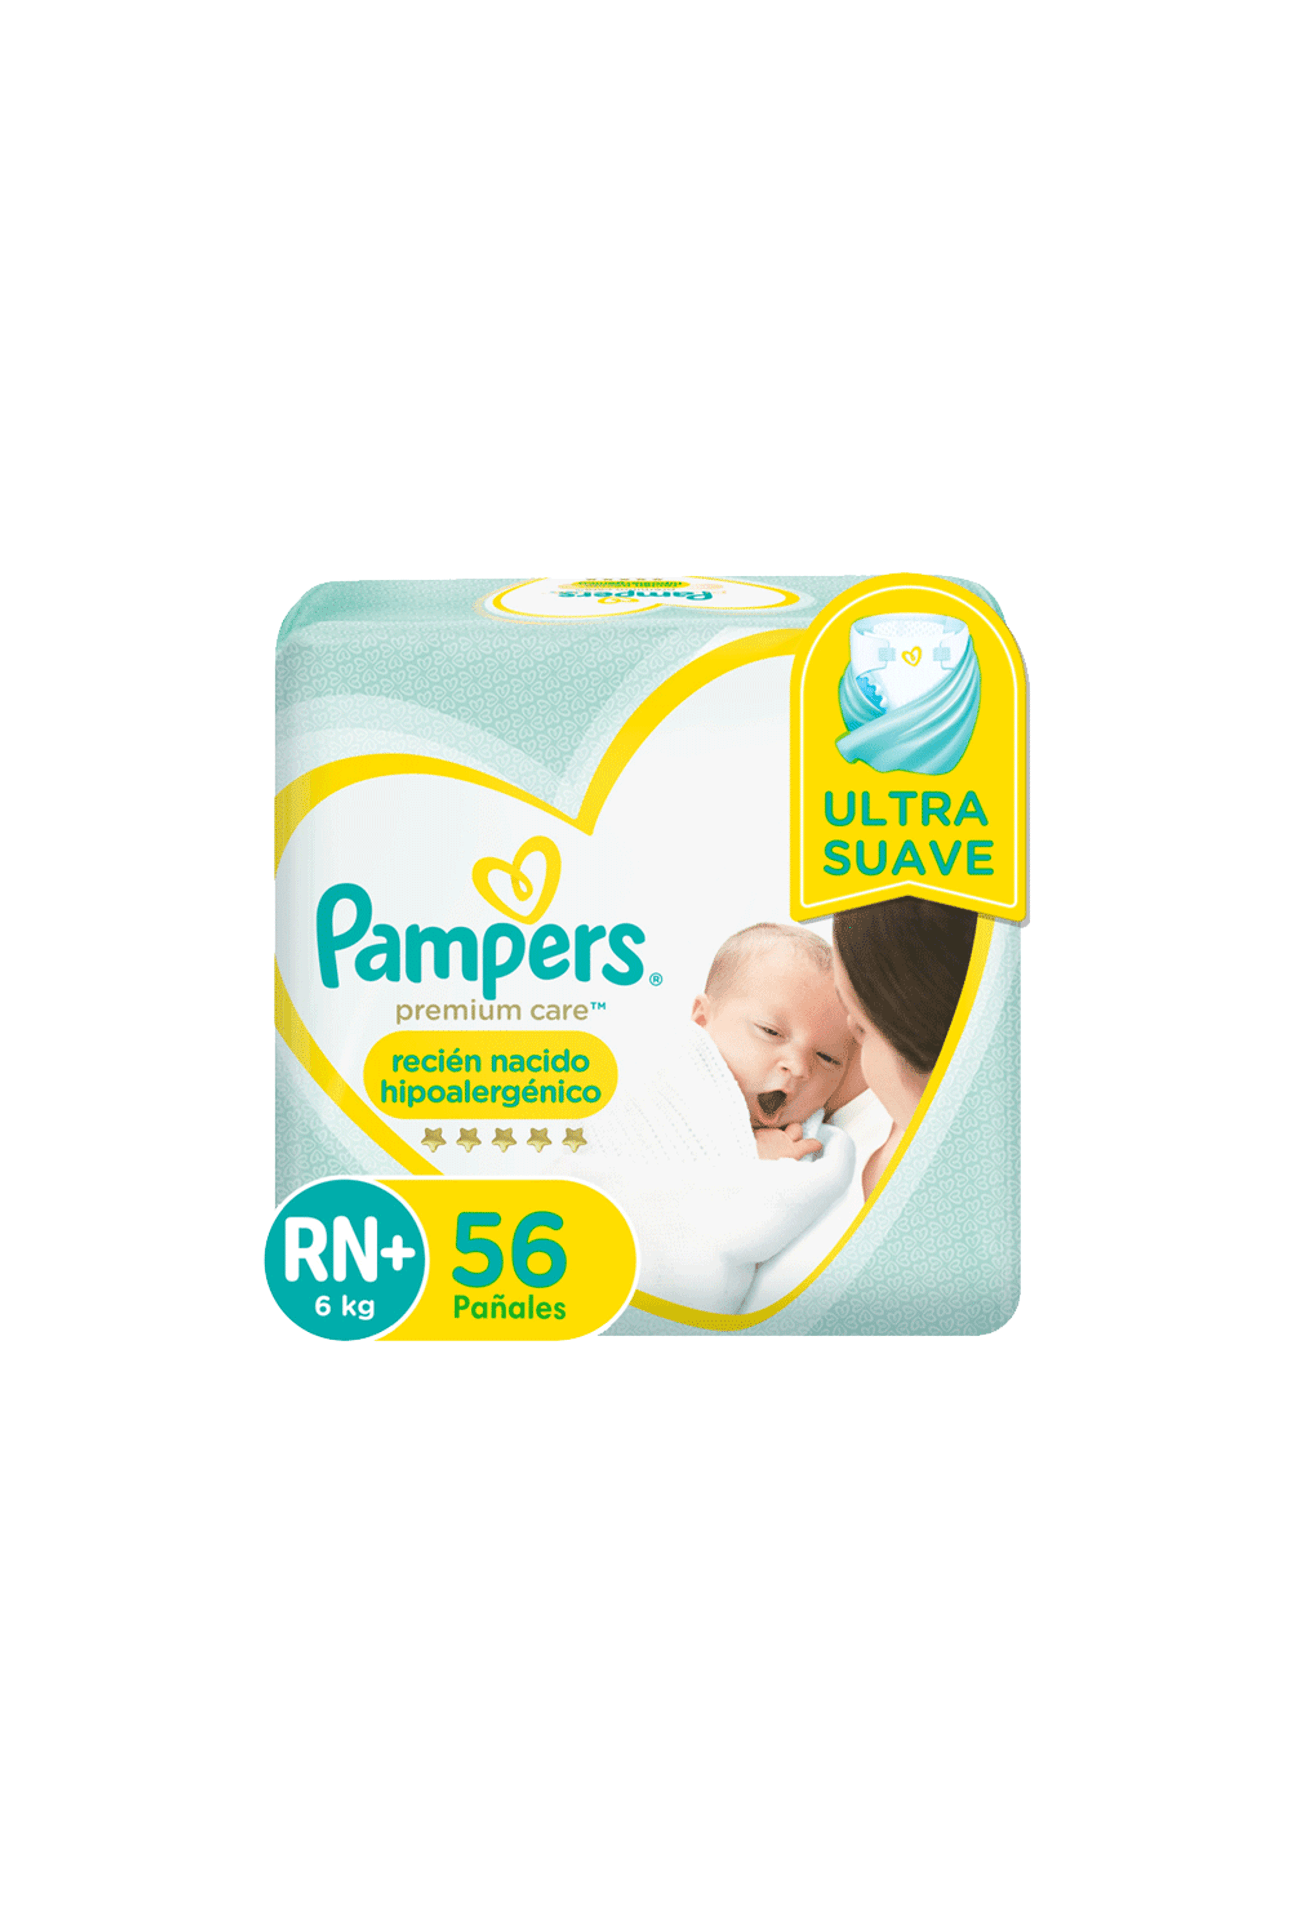 Pampers-Pañal-Premium-Care-Recien-Nacido-x-56-unid-7500435188760_img1